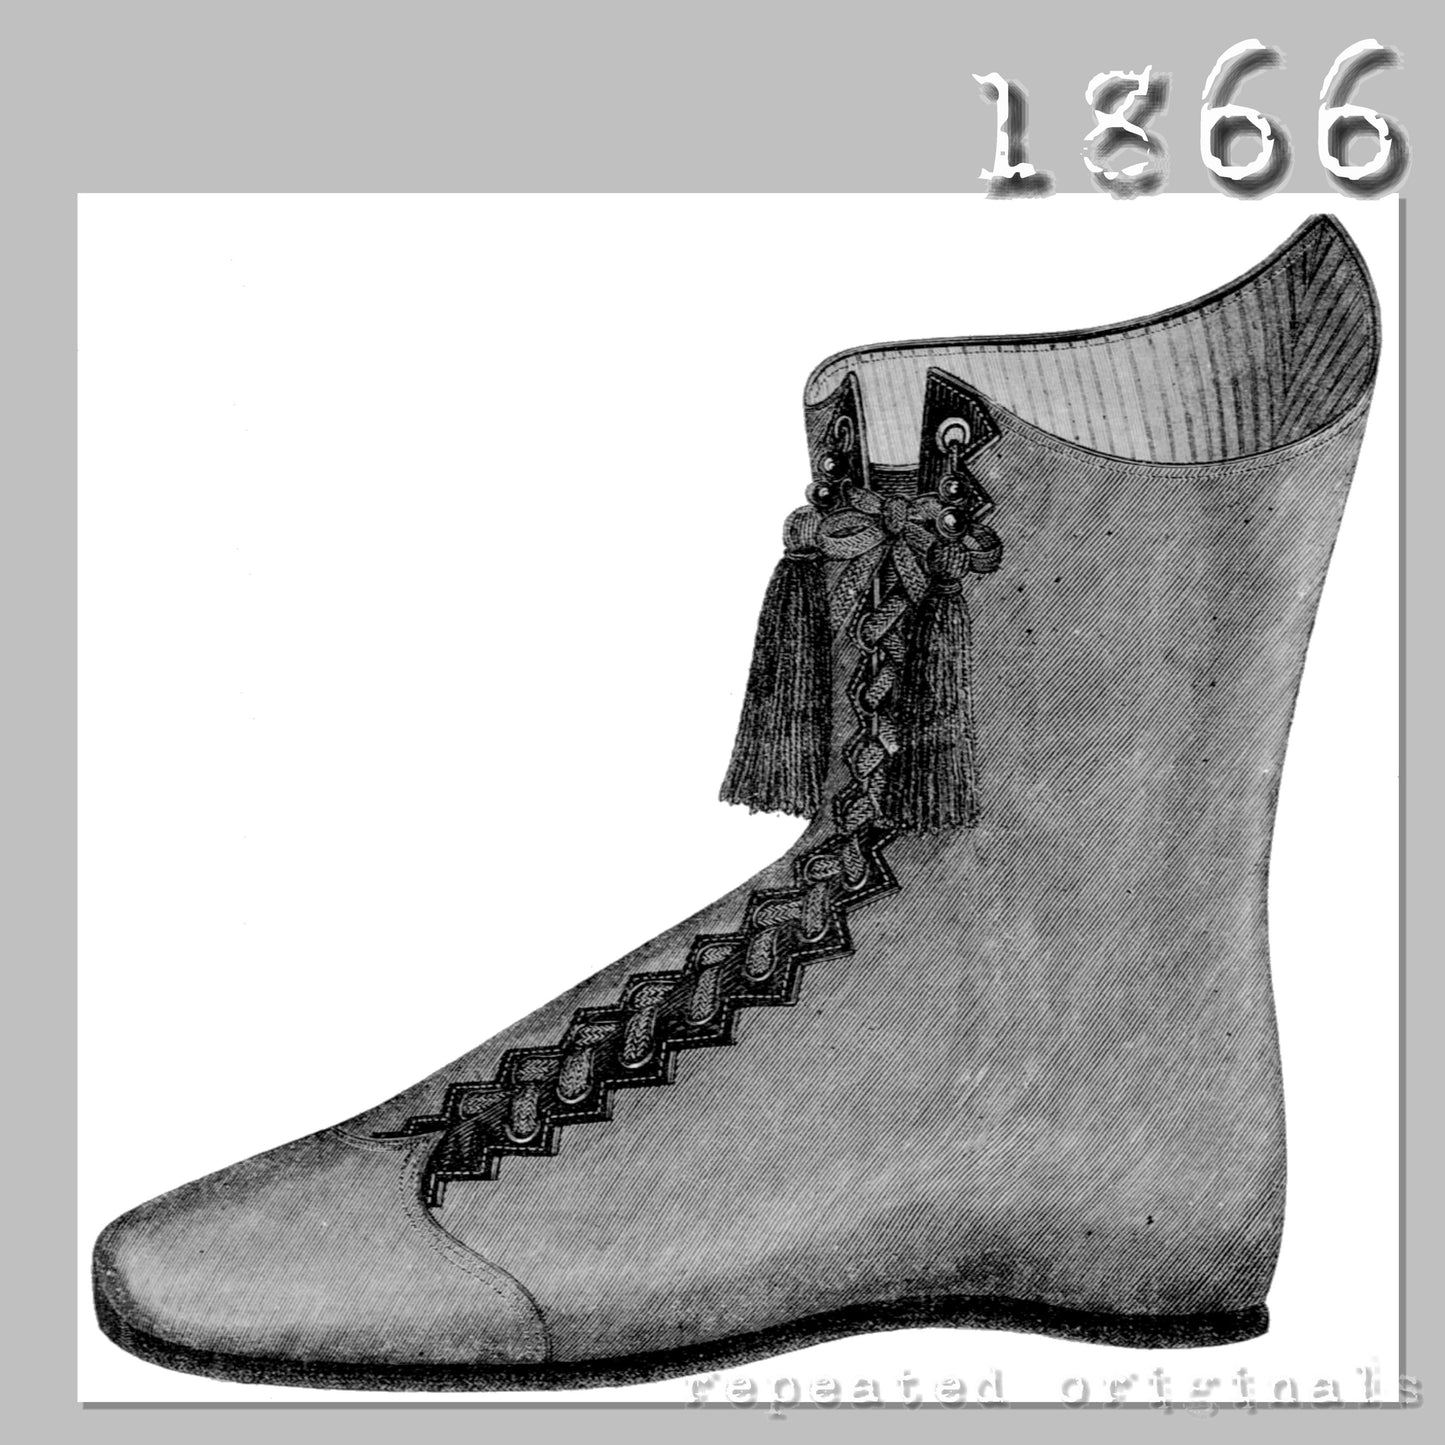 1866 Woman's Boot Pattern - INSTANT DOWNLOAD PDF